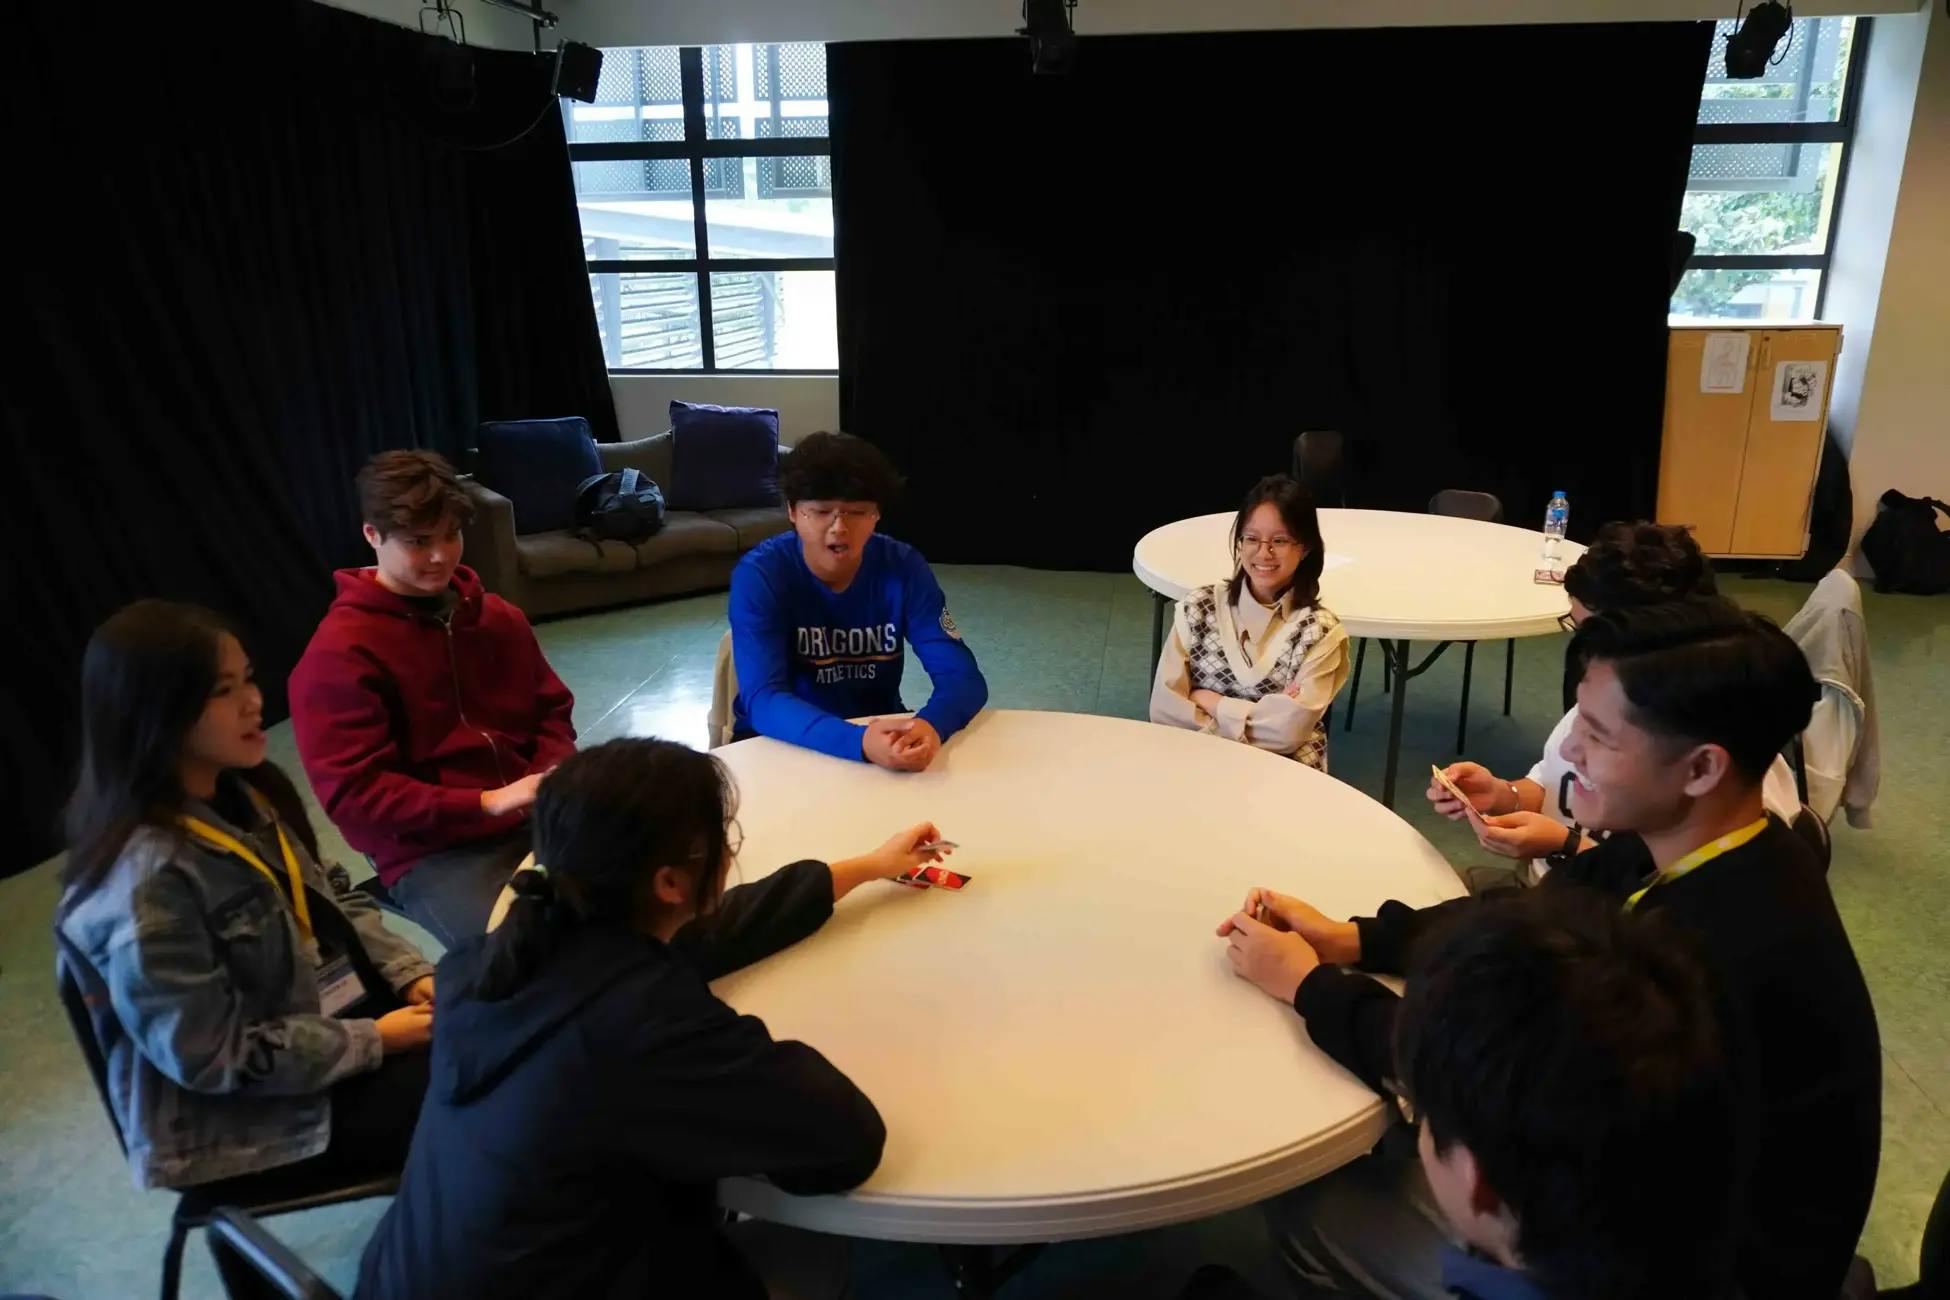 MLV students sitting in a round table playing UNO together